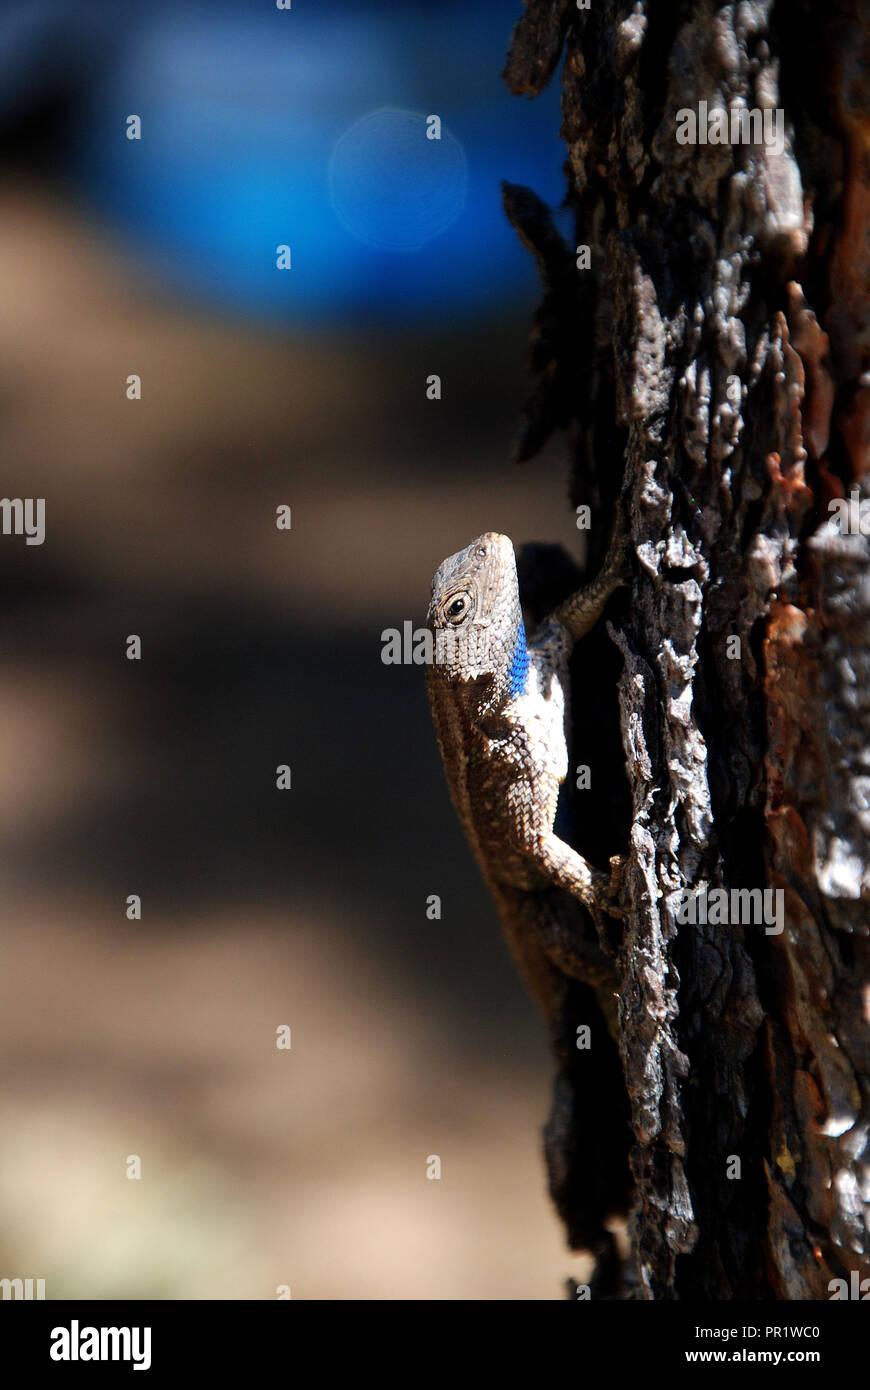 A cute little beige and blue gecko (lizard) staring at me while climbing on the bark a tree, in the mountains of Oregon, USA, on a blurry background Stock Photo